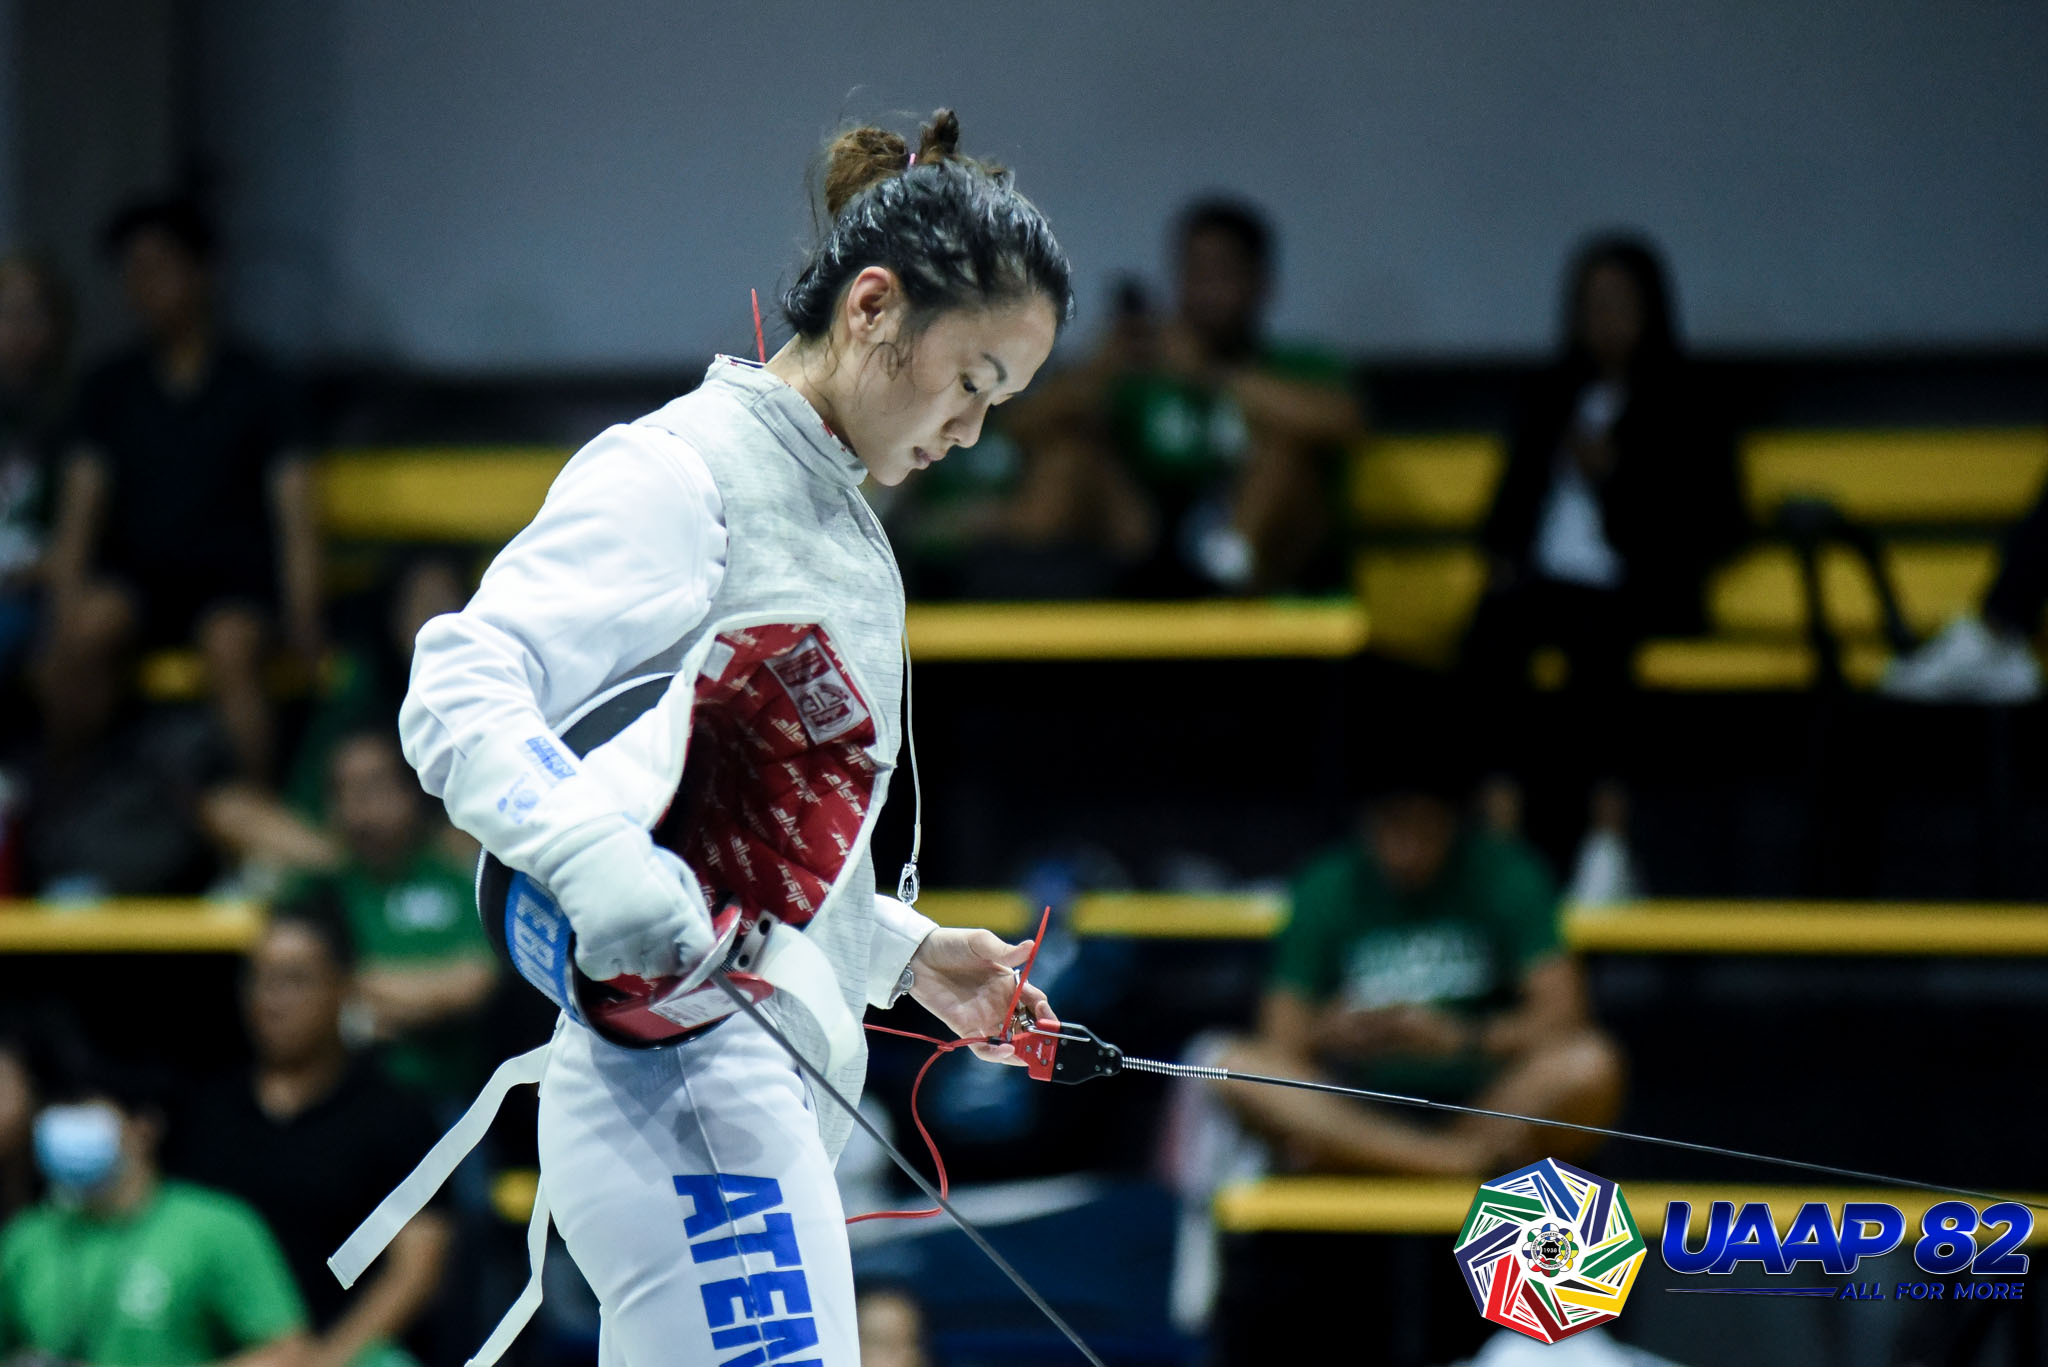 UAAP82-WOMENS-FOIL-FINALS-8TH-PHOTO-ADMU-ESTEBAN Maxine Esteban on switching federations: 'It was about self-respect' Fencing News  - philippine sports news